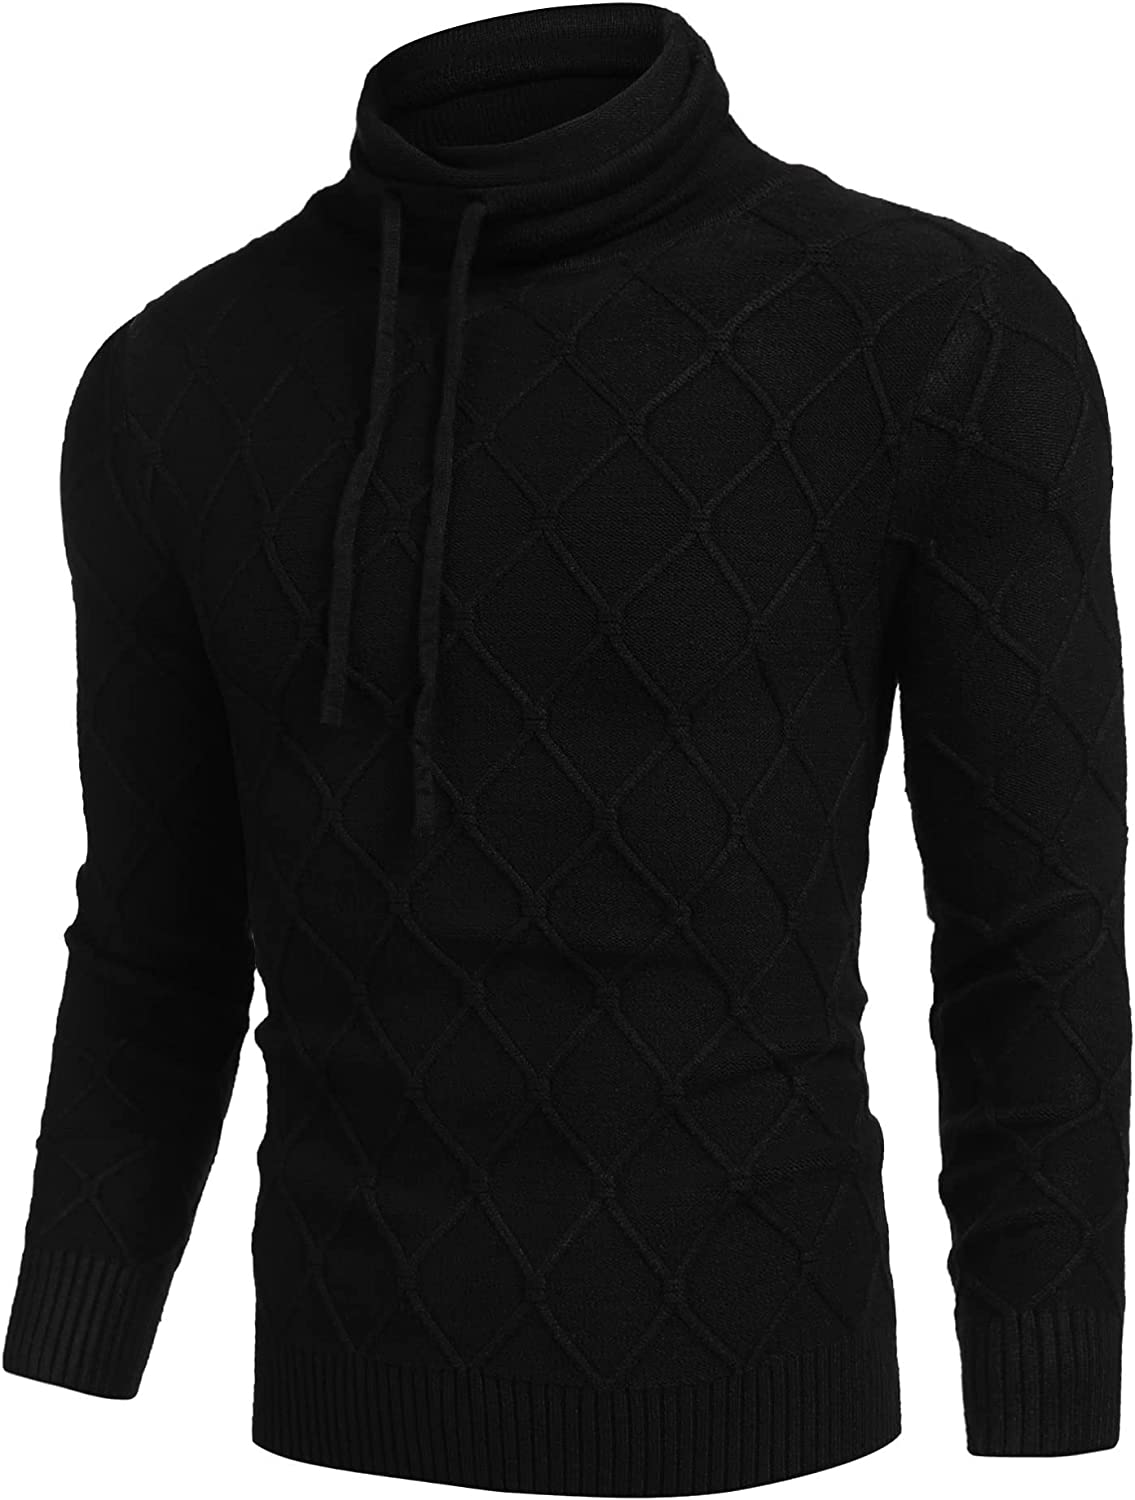 COOFANDY Men's Knitted Turtleneck Sweater Casual Thermal Long Sleeve Pullover Pullovers COOFANDY Store Black Small 